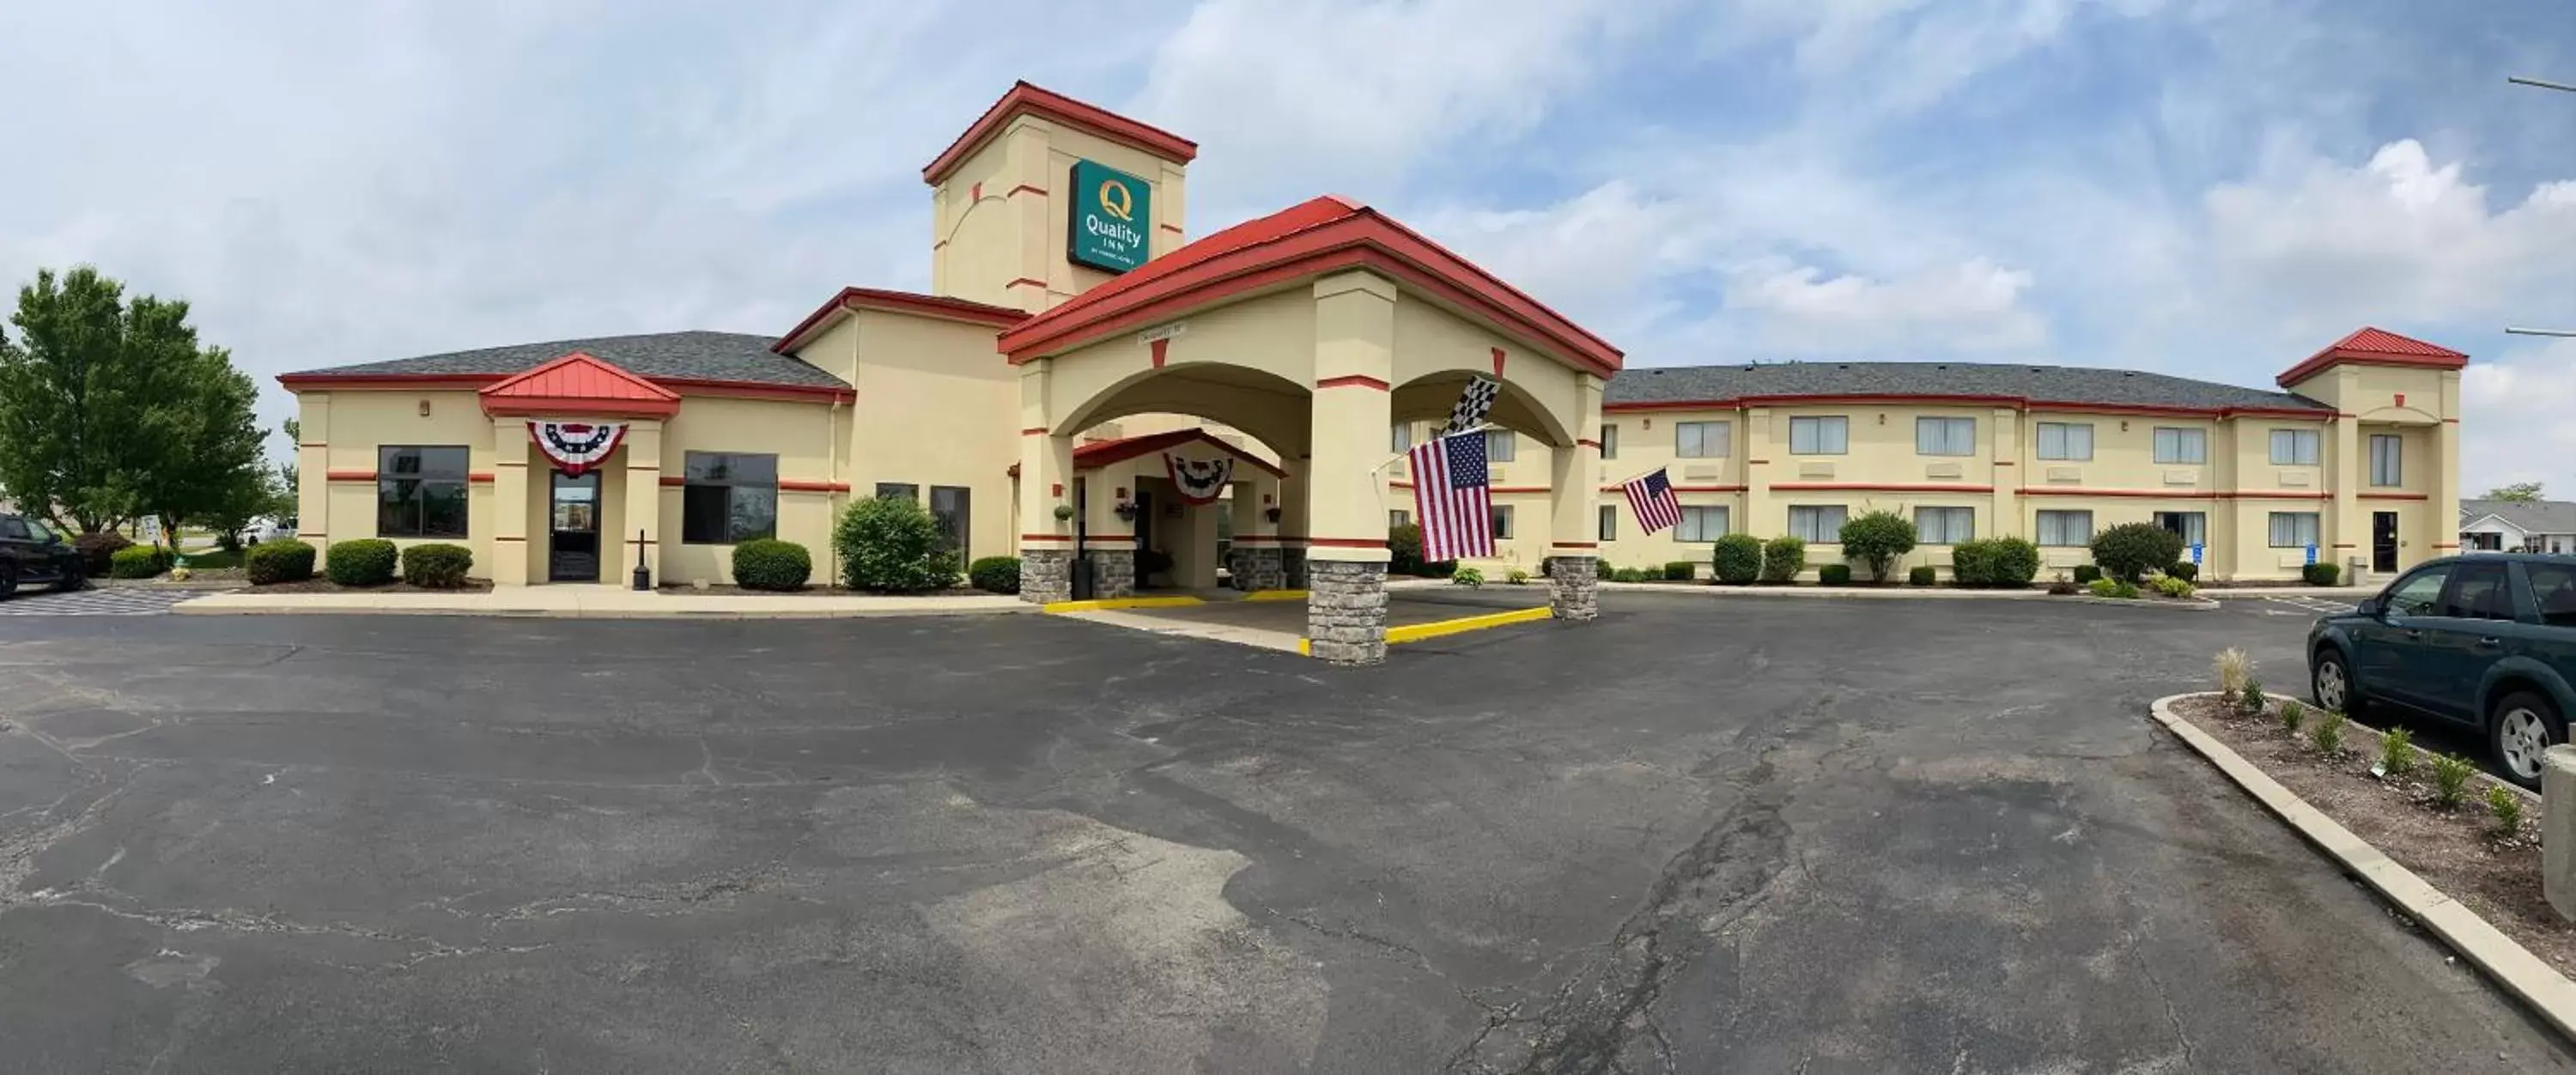 Property Building in Quality Inn Greenville North